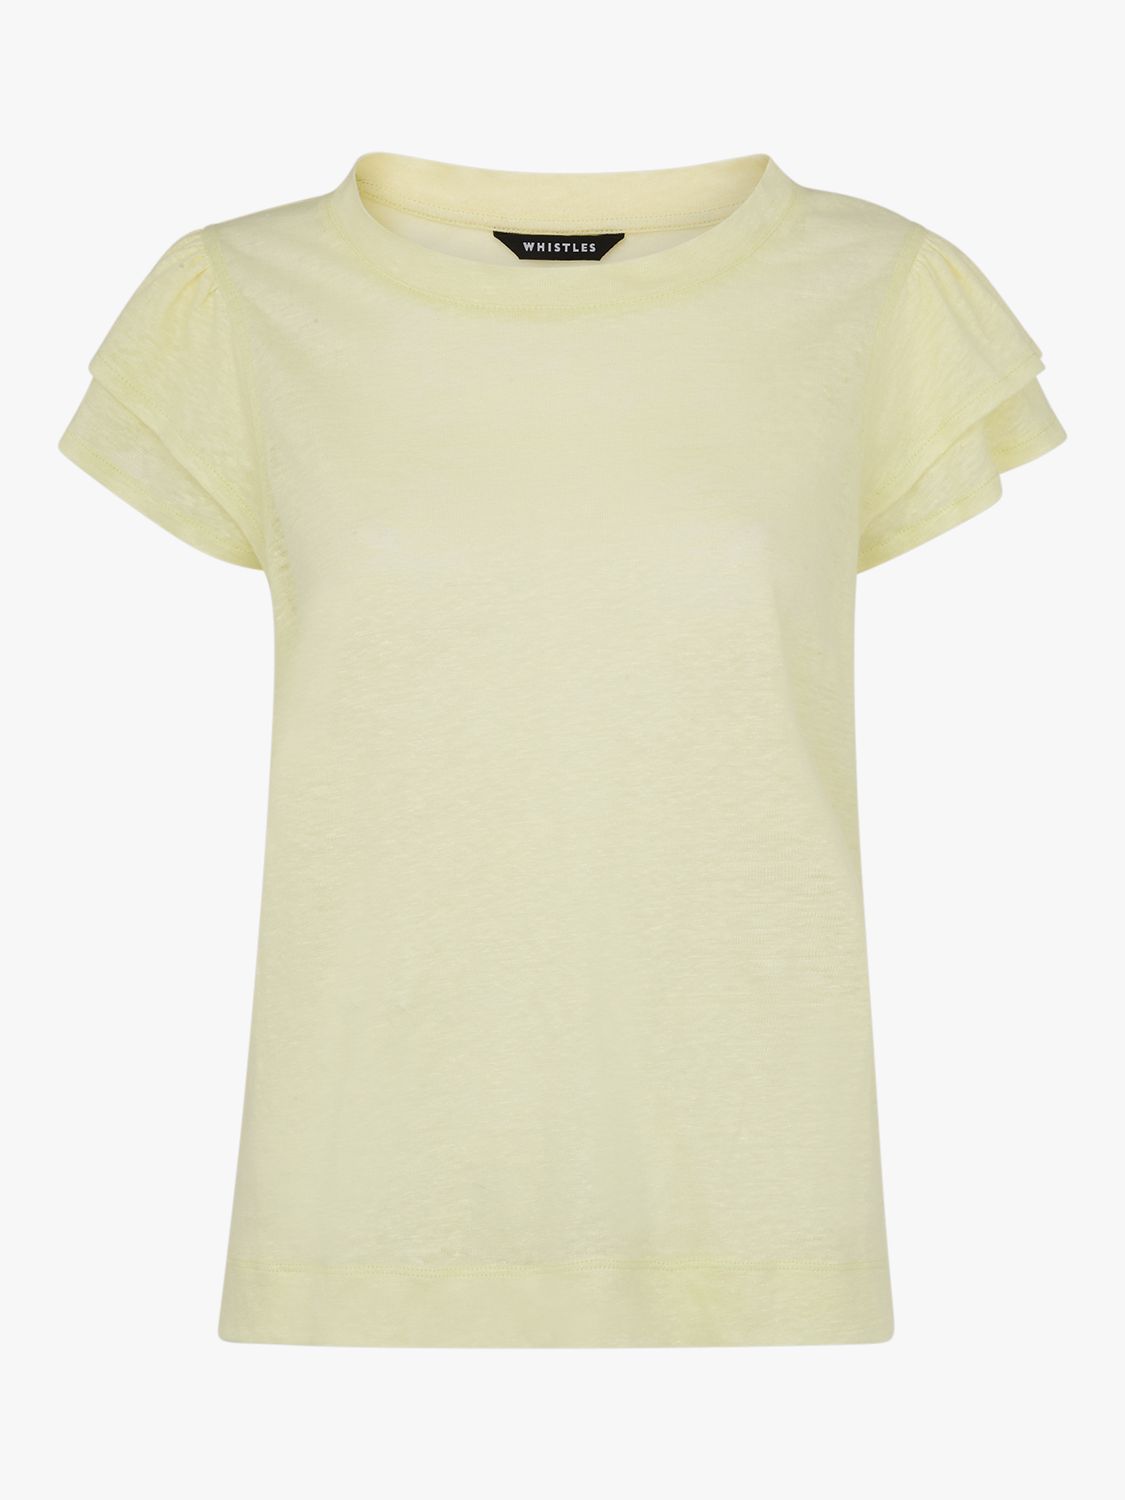 Buy Whistles Laura Linen Frill Sleeve Top Online at johnlewis.com